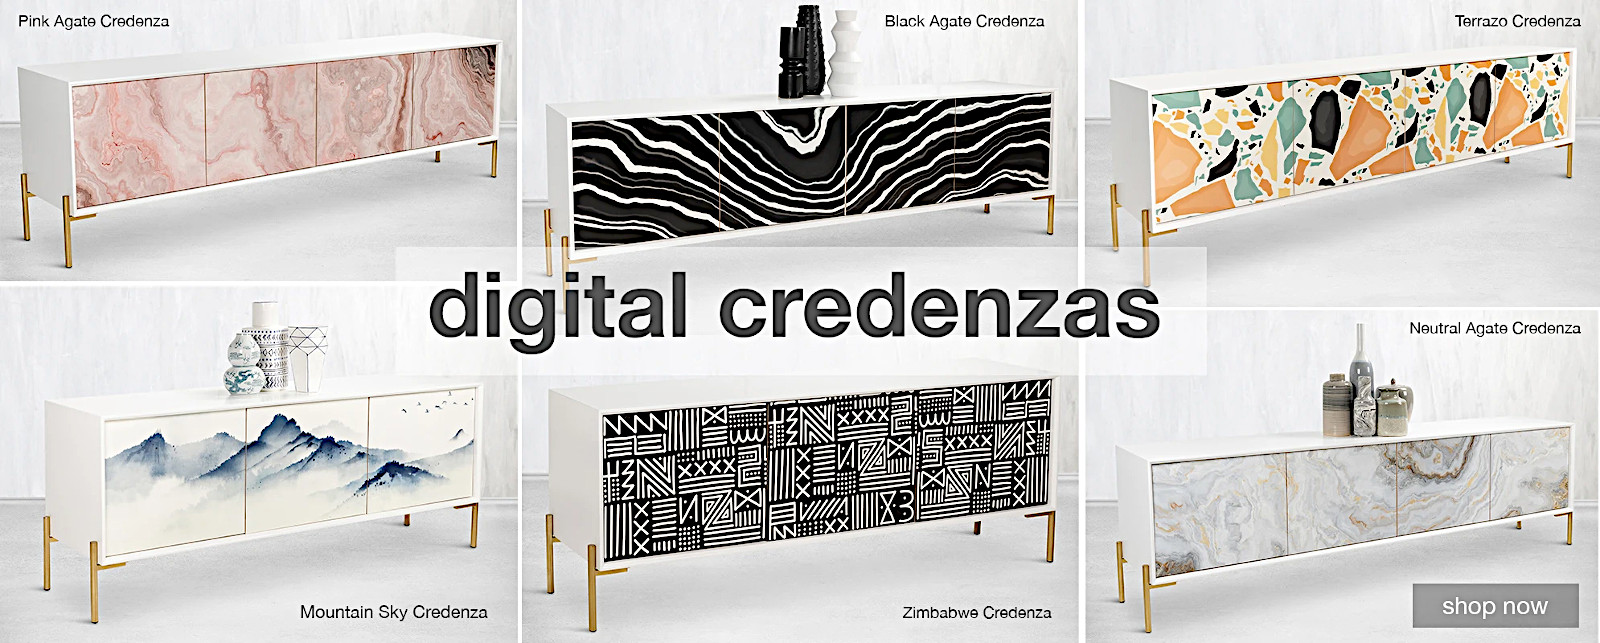 At A Reduced Price digitally printed credenzas